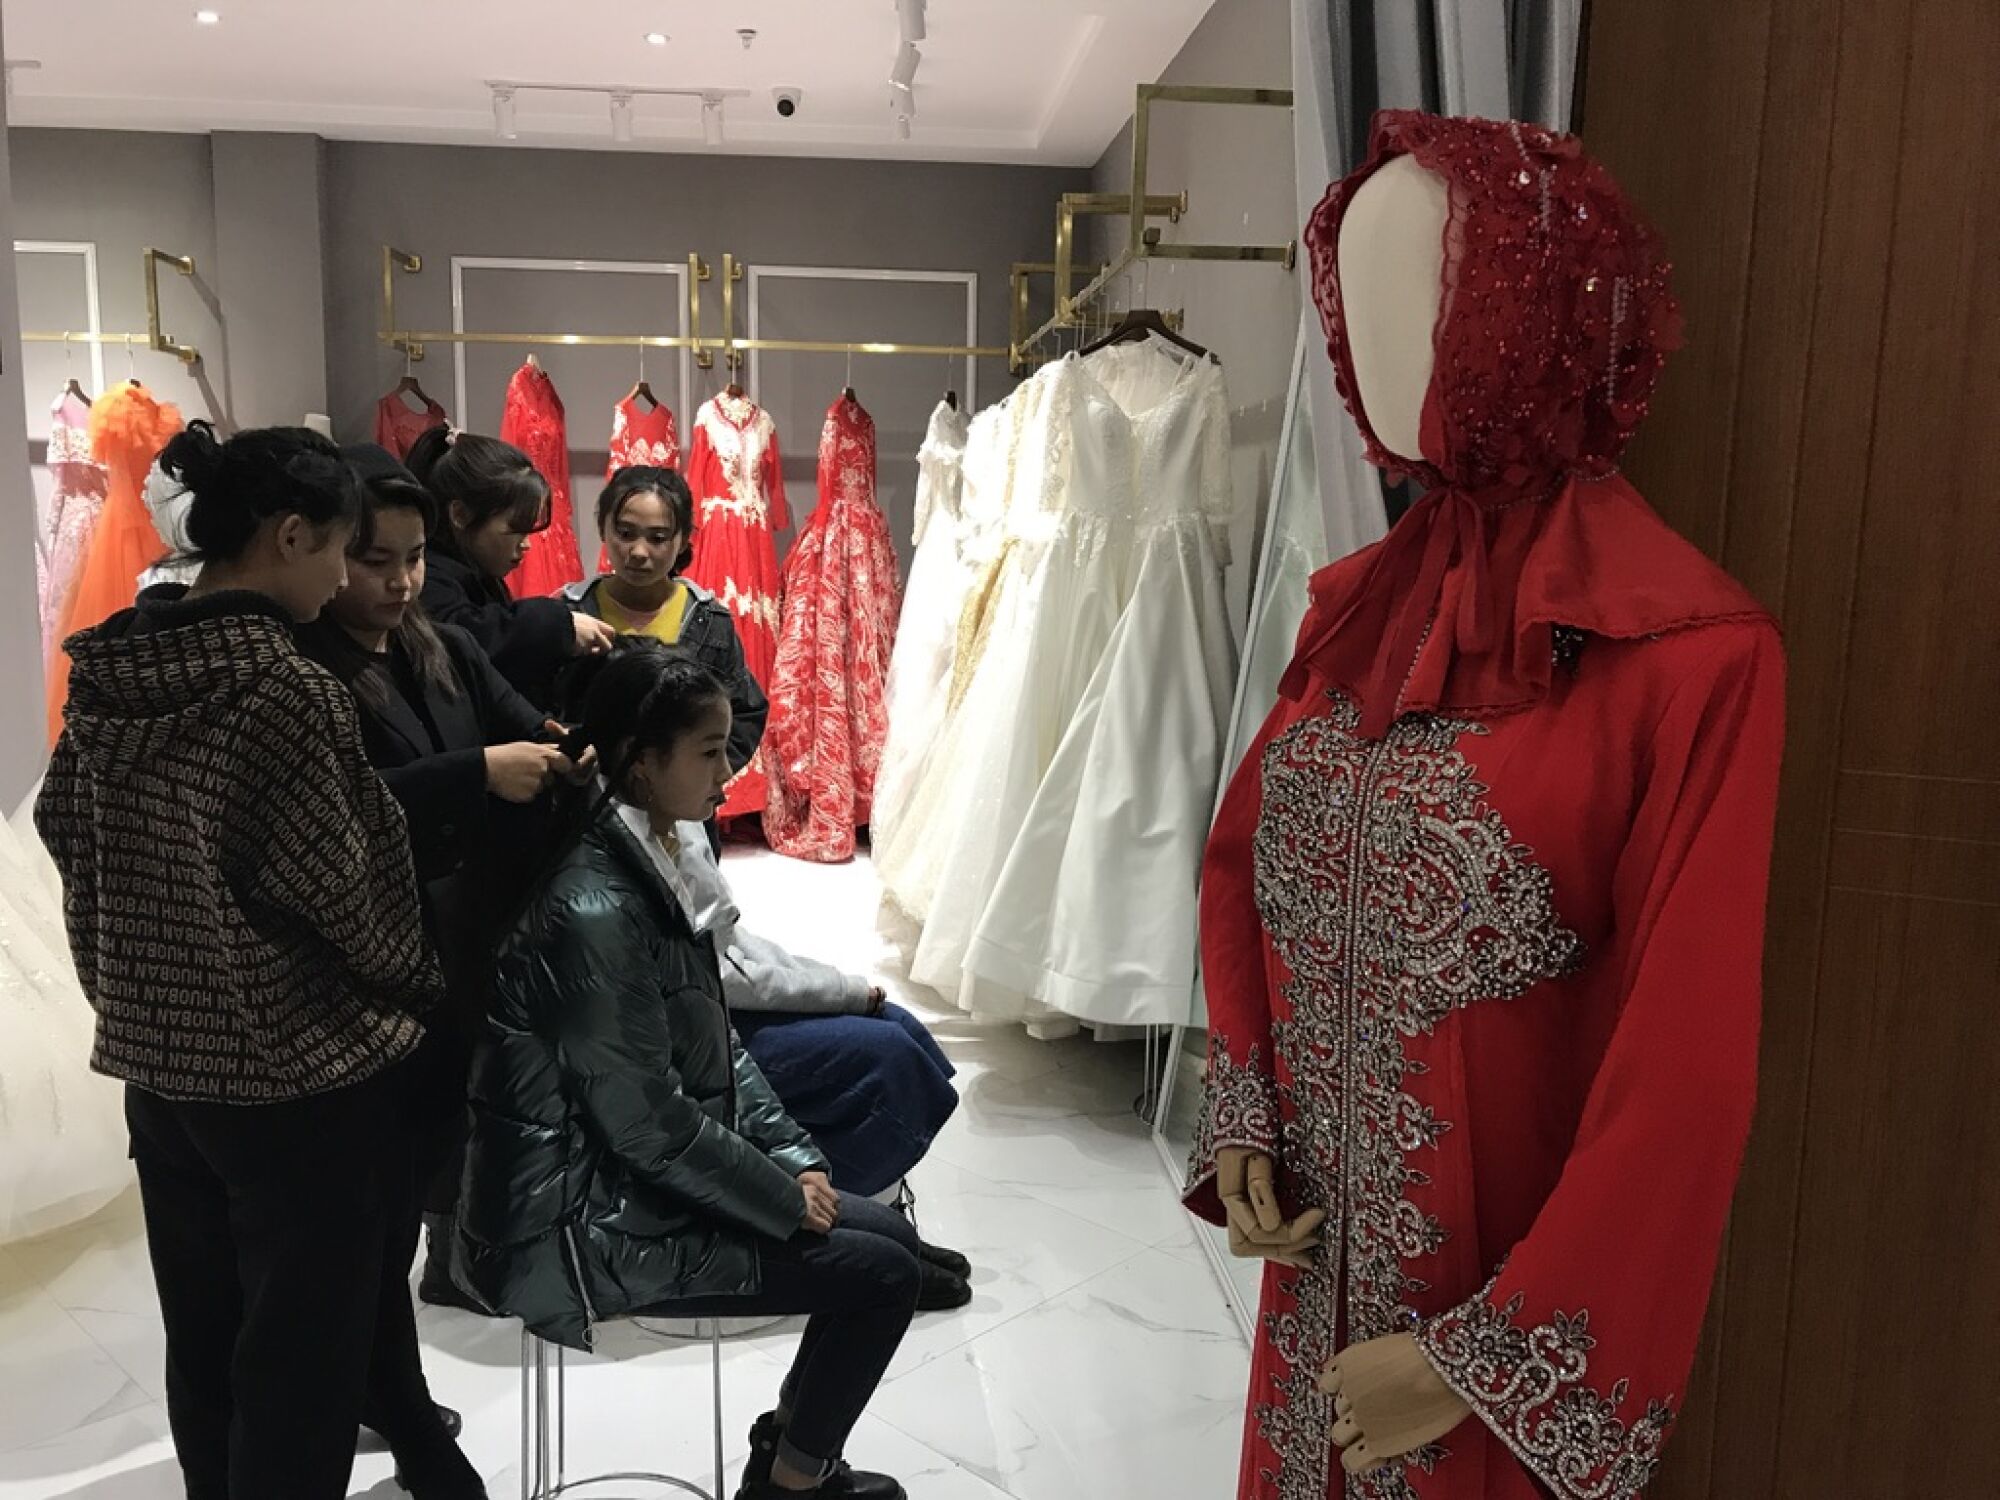 Young Dongxiang women receive training to become bridal hair and makeup artists at a vocational school.